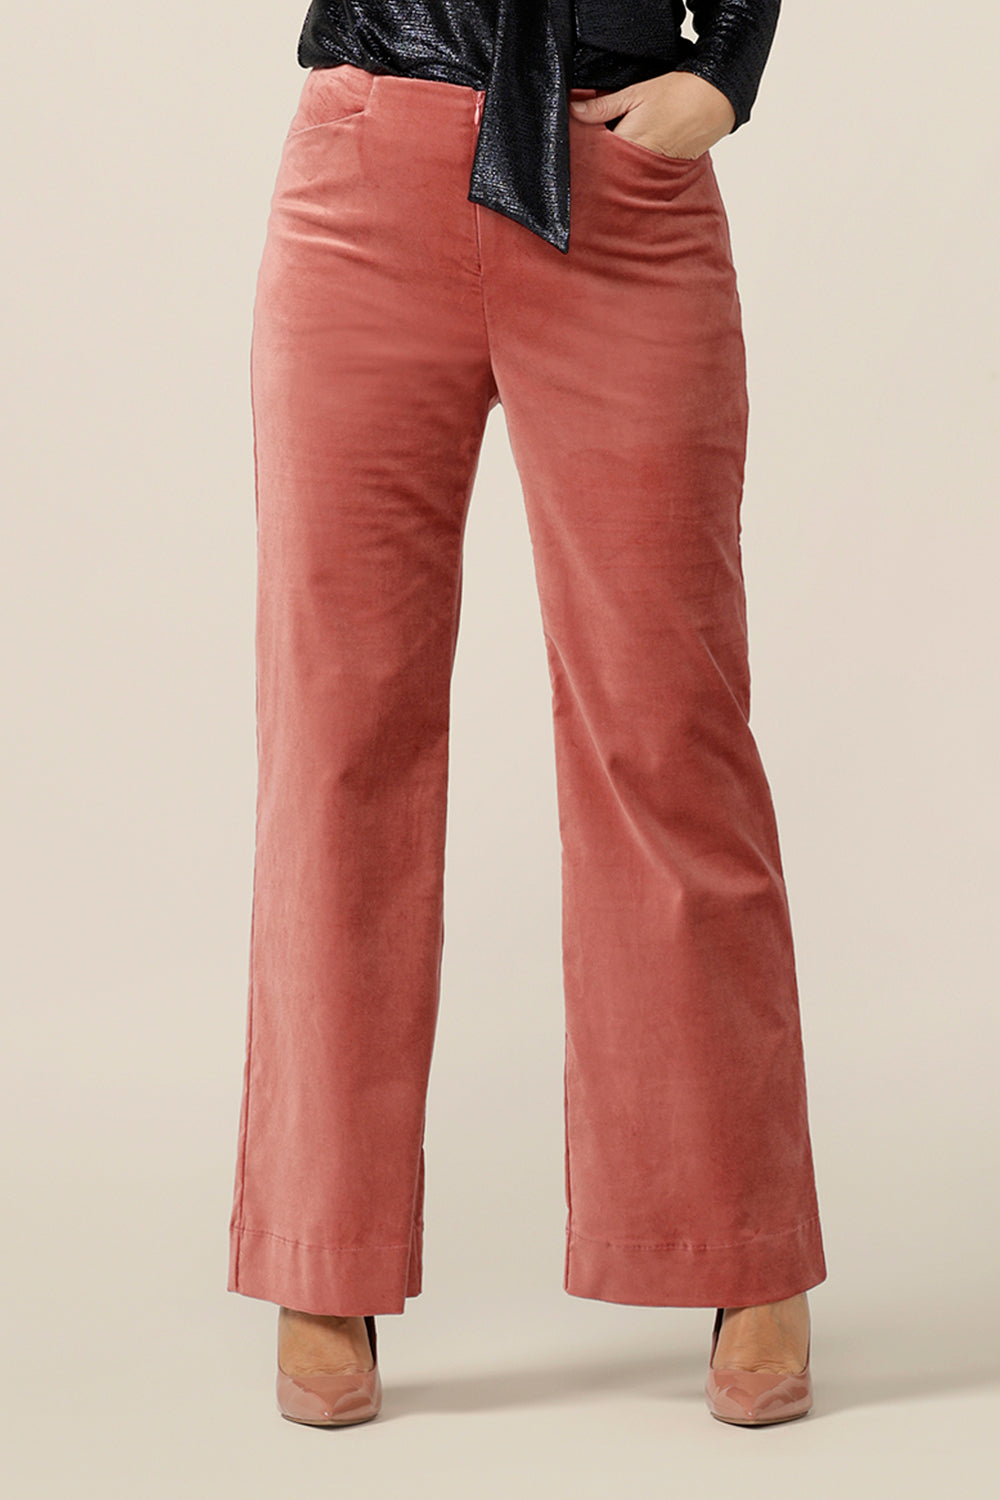 Evening and cocktail wear gets a touch of disco with these flared leg, tailored pants in musk pink velveteen. Made in Australia, these special event pants are designed by women's clothing and occasionwear brand, L&F in sizes 8 to 24, petite to plus sizes.